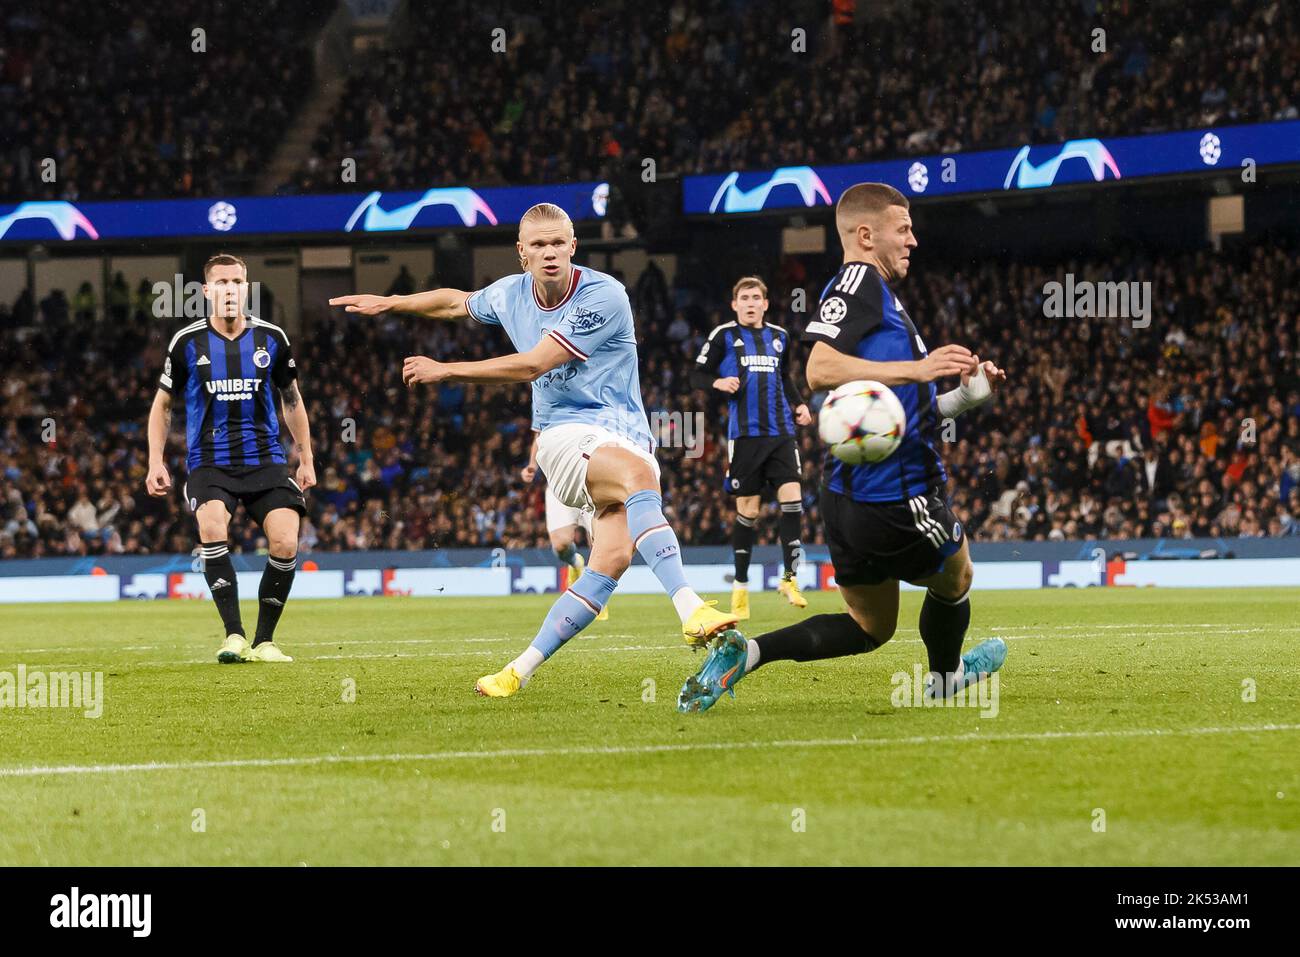 Manchester, UK. 05th Oct, 2022. Erling Haland of Manchester City scores their first goal to make the score 1-0 during the UEFA Champions League Group G match between Manchester City and FC Copenhagen at the Etihad Stadium on October 5th 2022 in Manchester, England. (Photo by Daniel Chesterton/phcimages.com) Credit: PHC Images/Alamy Live News Stock Photo